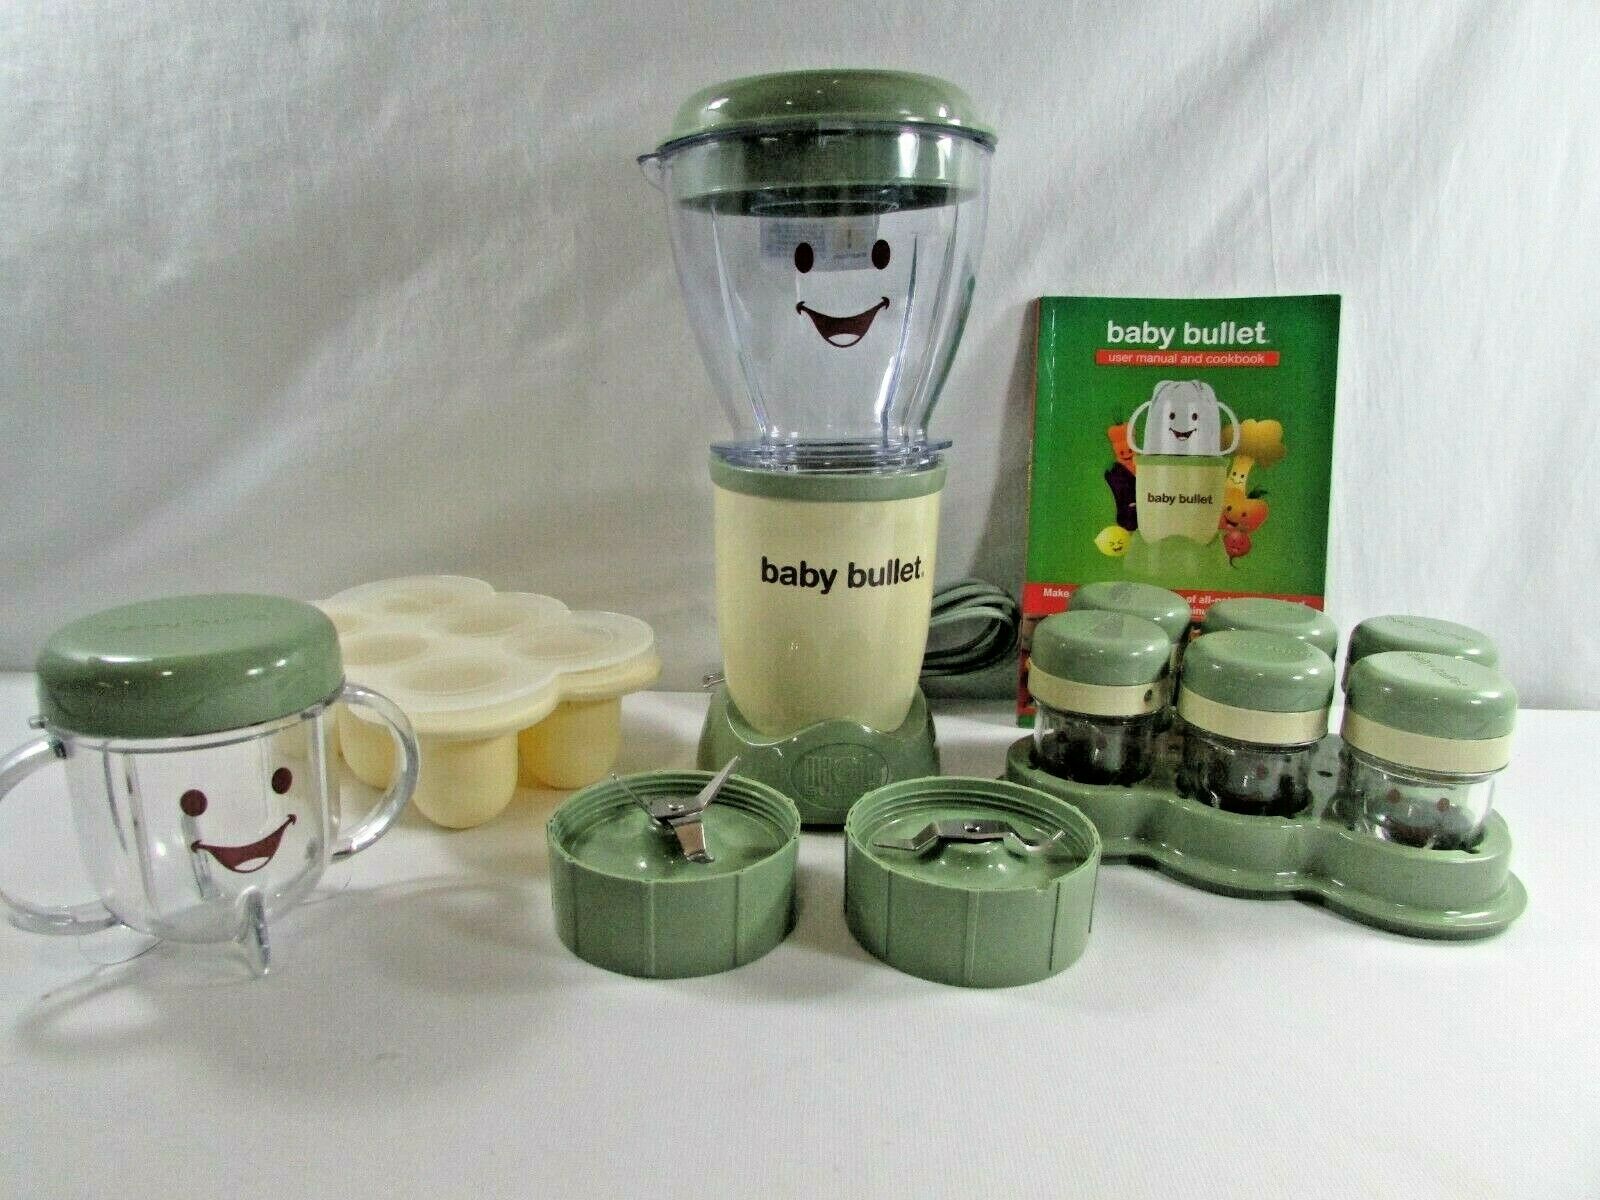 Baby Bullet Bbr200102 Magic Bullet Baby Food Processor System Green (incomplete)